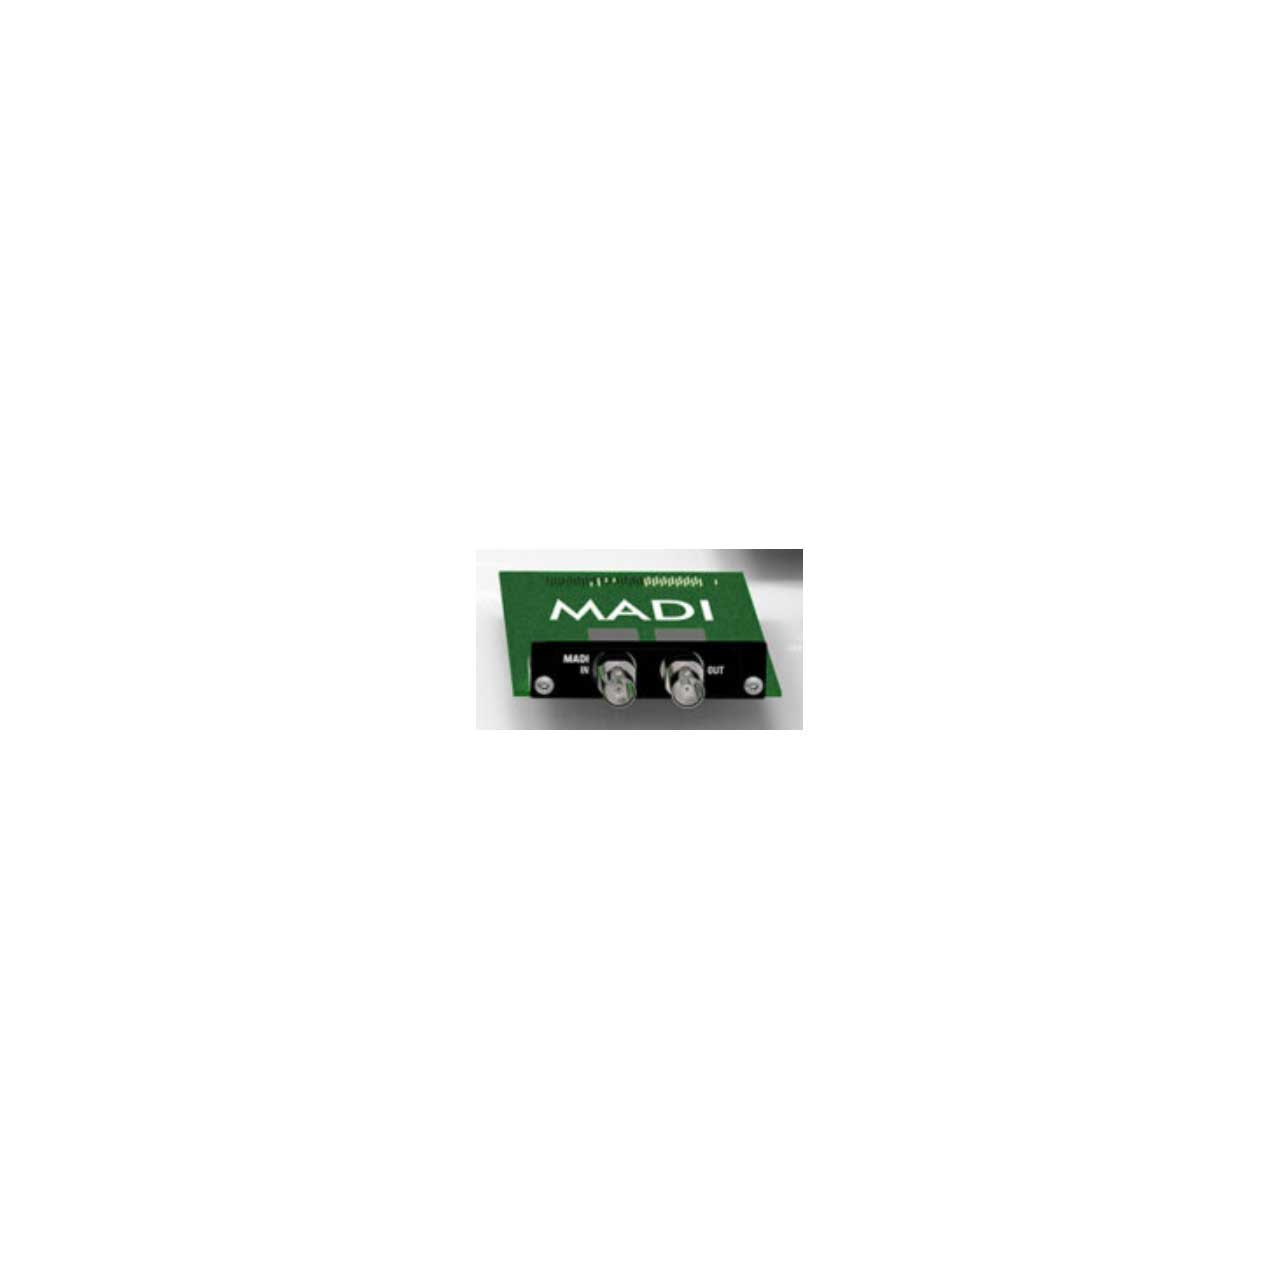 Appsys Pro Audio AUX MADI COAX 64 x 64 Channel Coaxial MADI Card for Flexiverter Converters AUX-MADI COAX